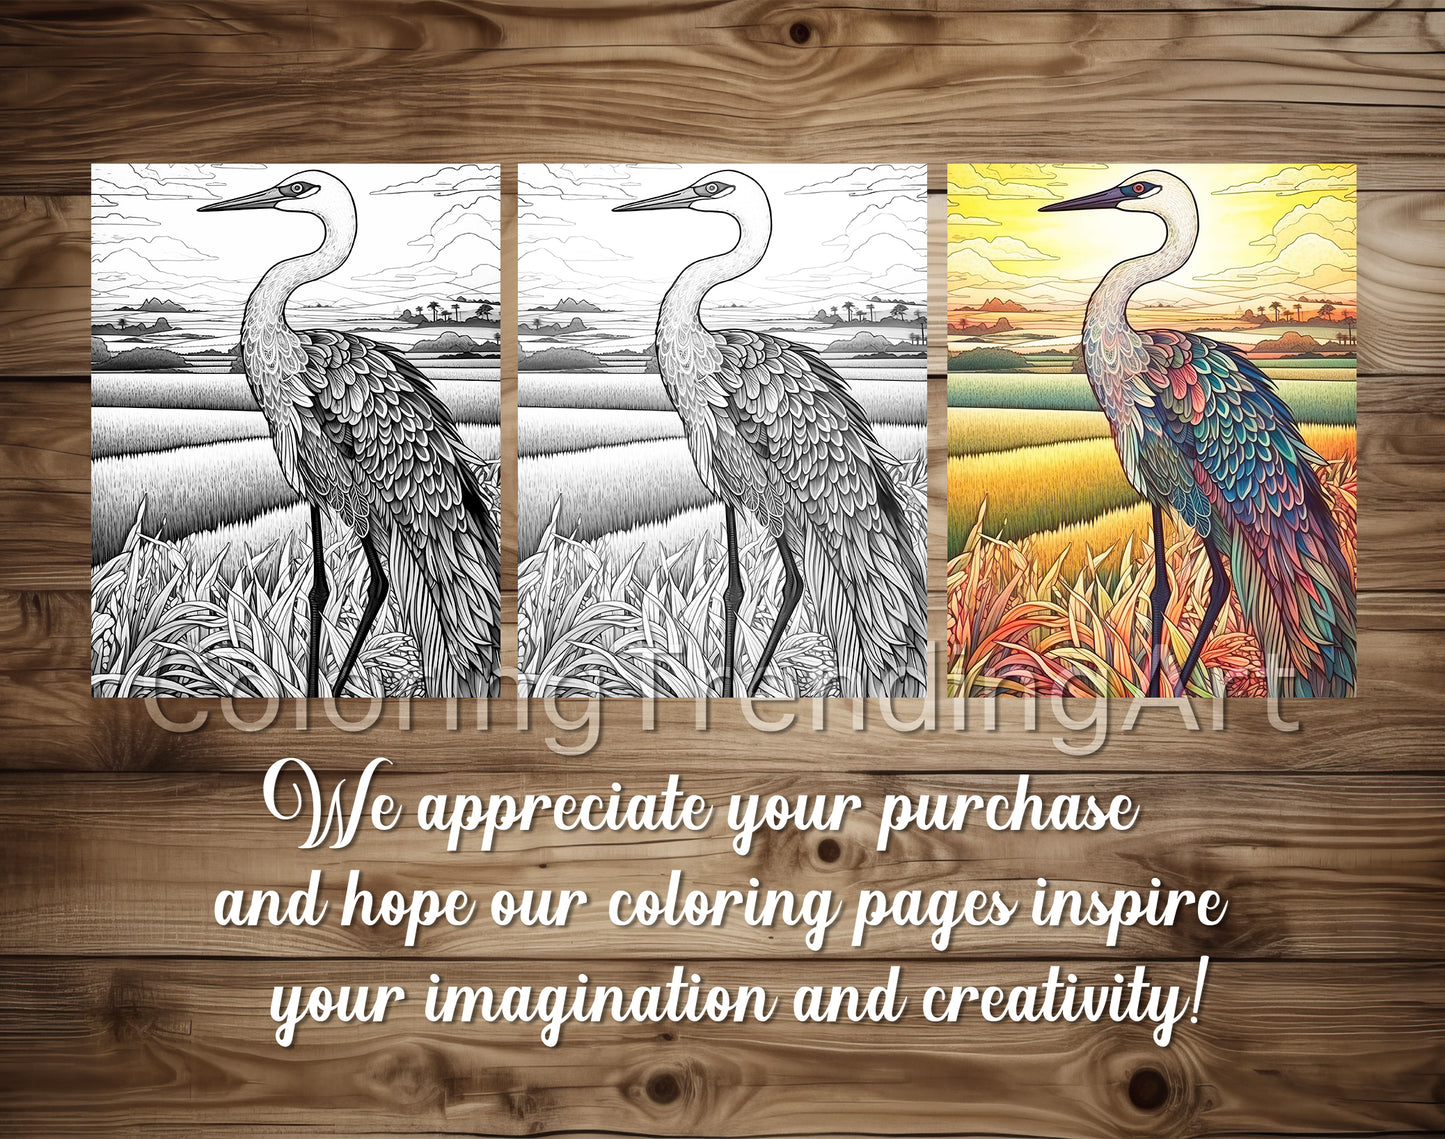 25 Amazing Birds Grayscale Coloring Pages Of Adorable Baby Angels - Instant Download - Printable PDF - TrendingColoring